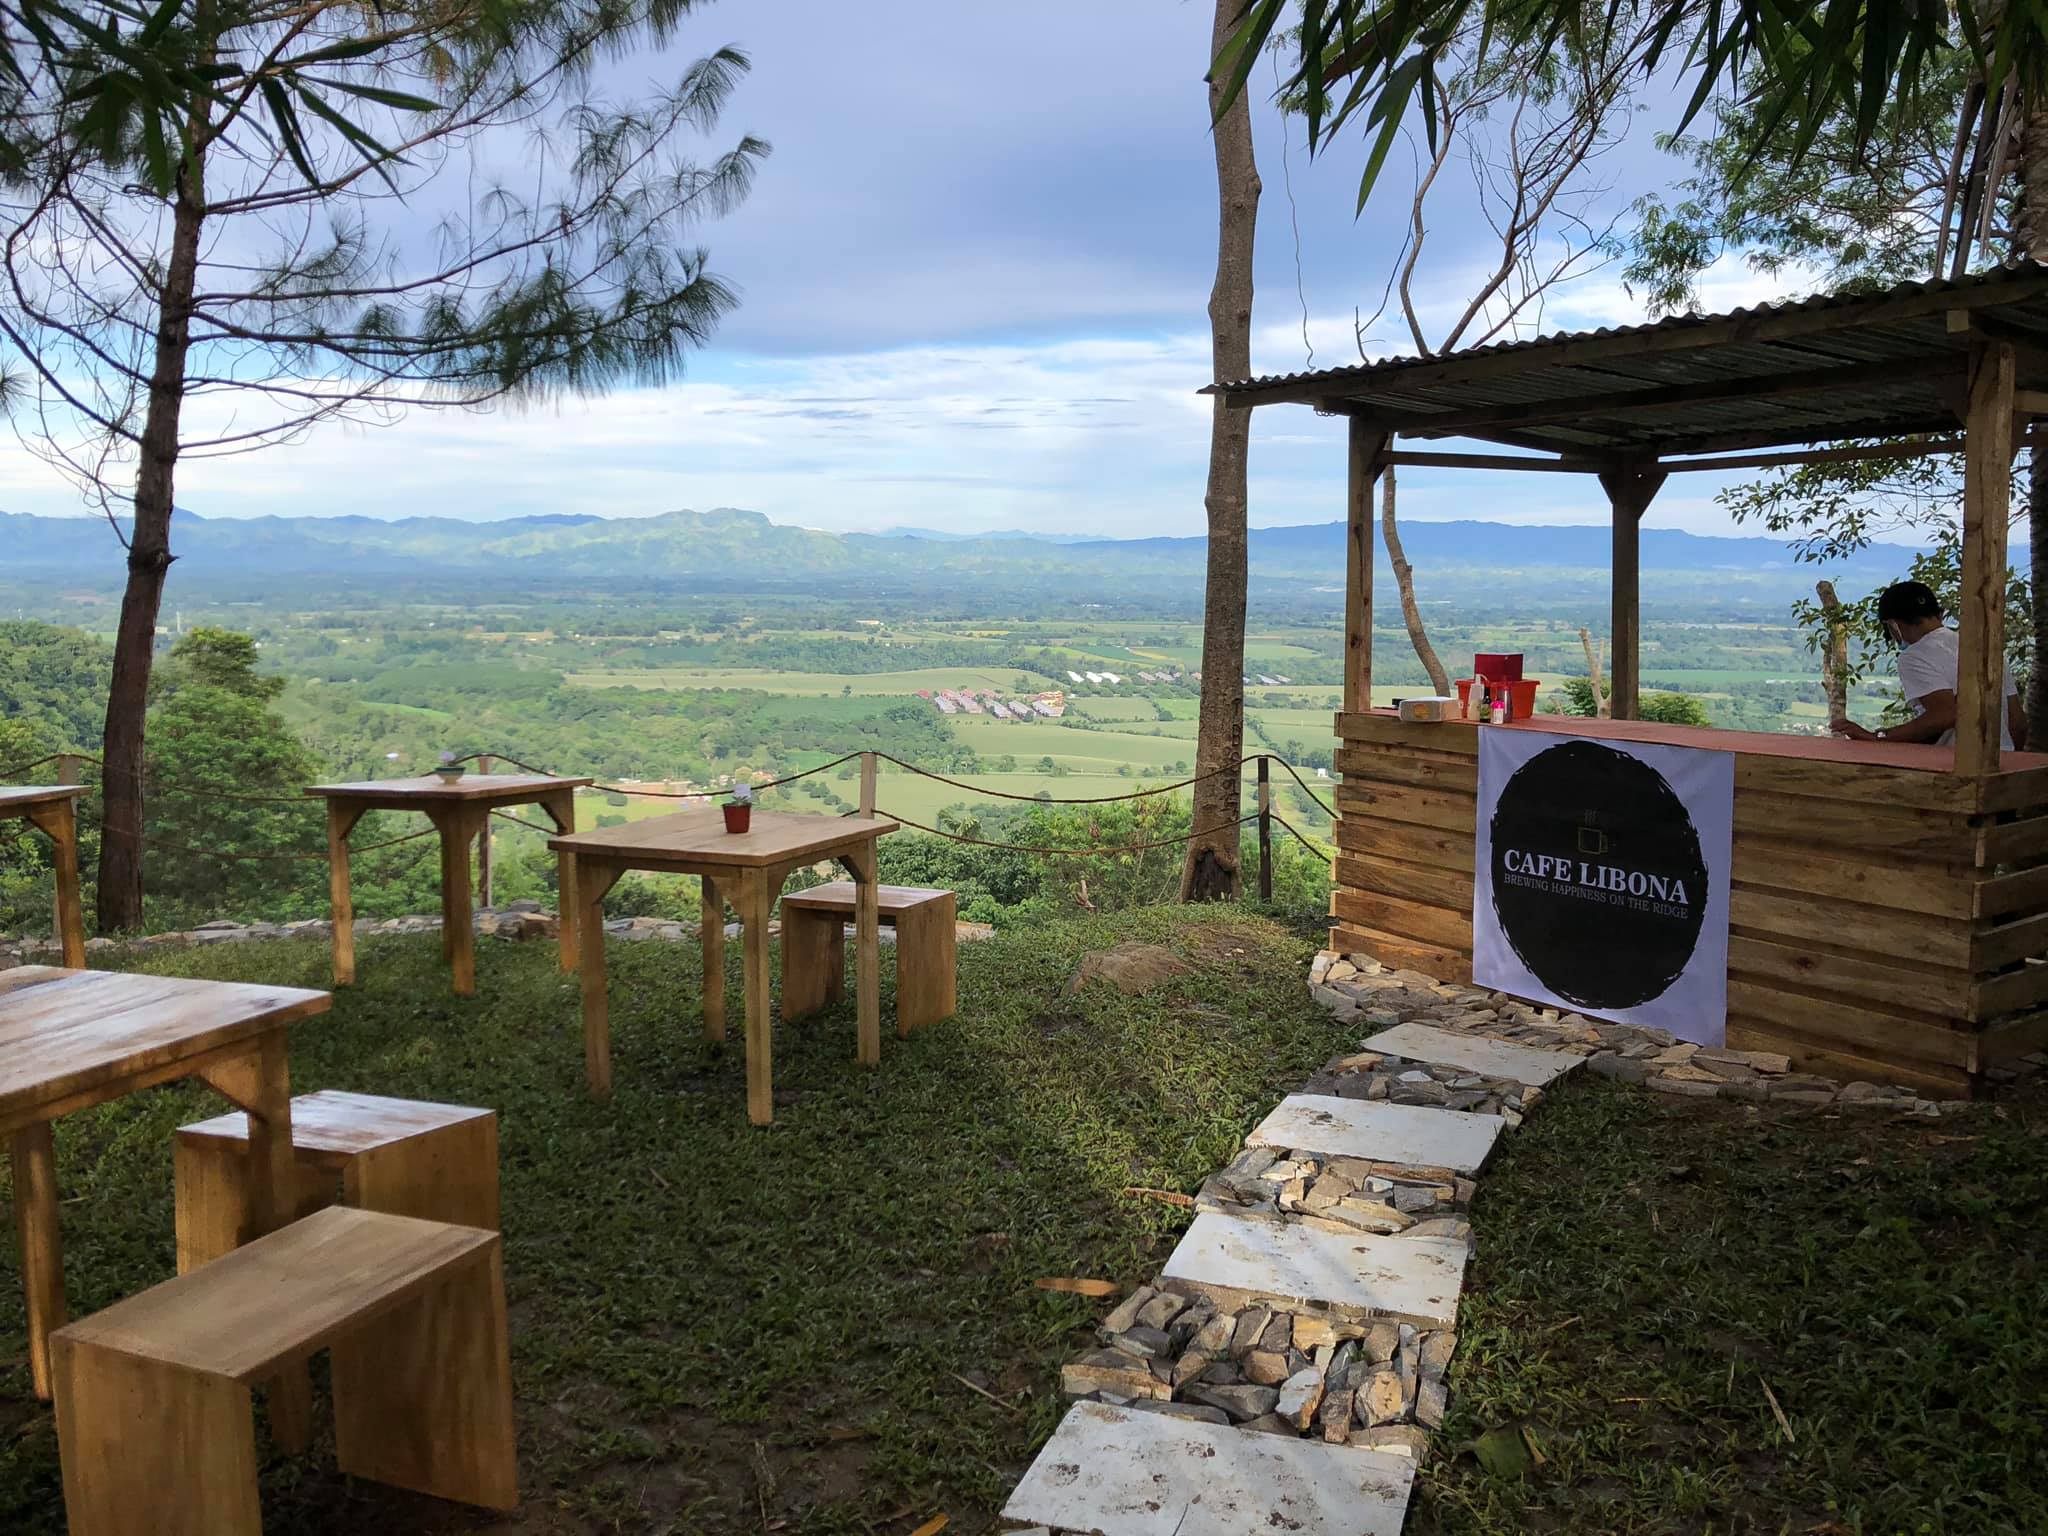 LOOK: Cafe Libona offers coffee, comfort food and a sweeping view